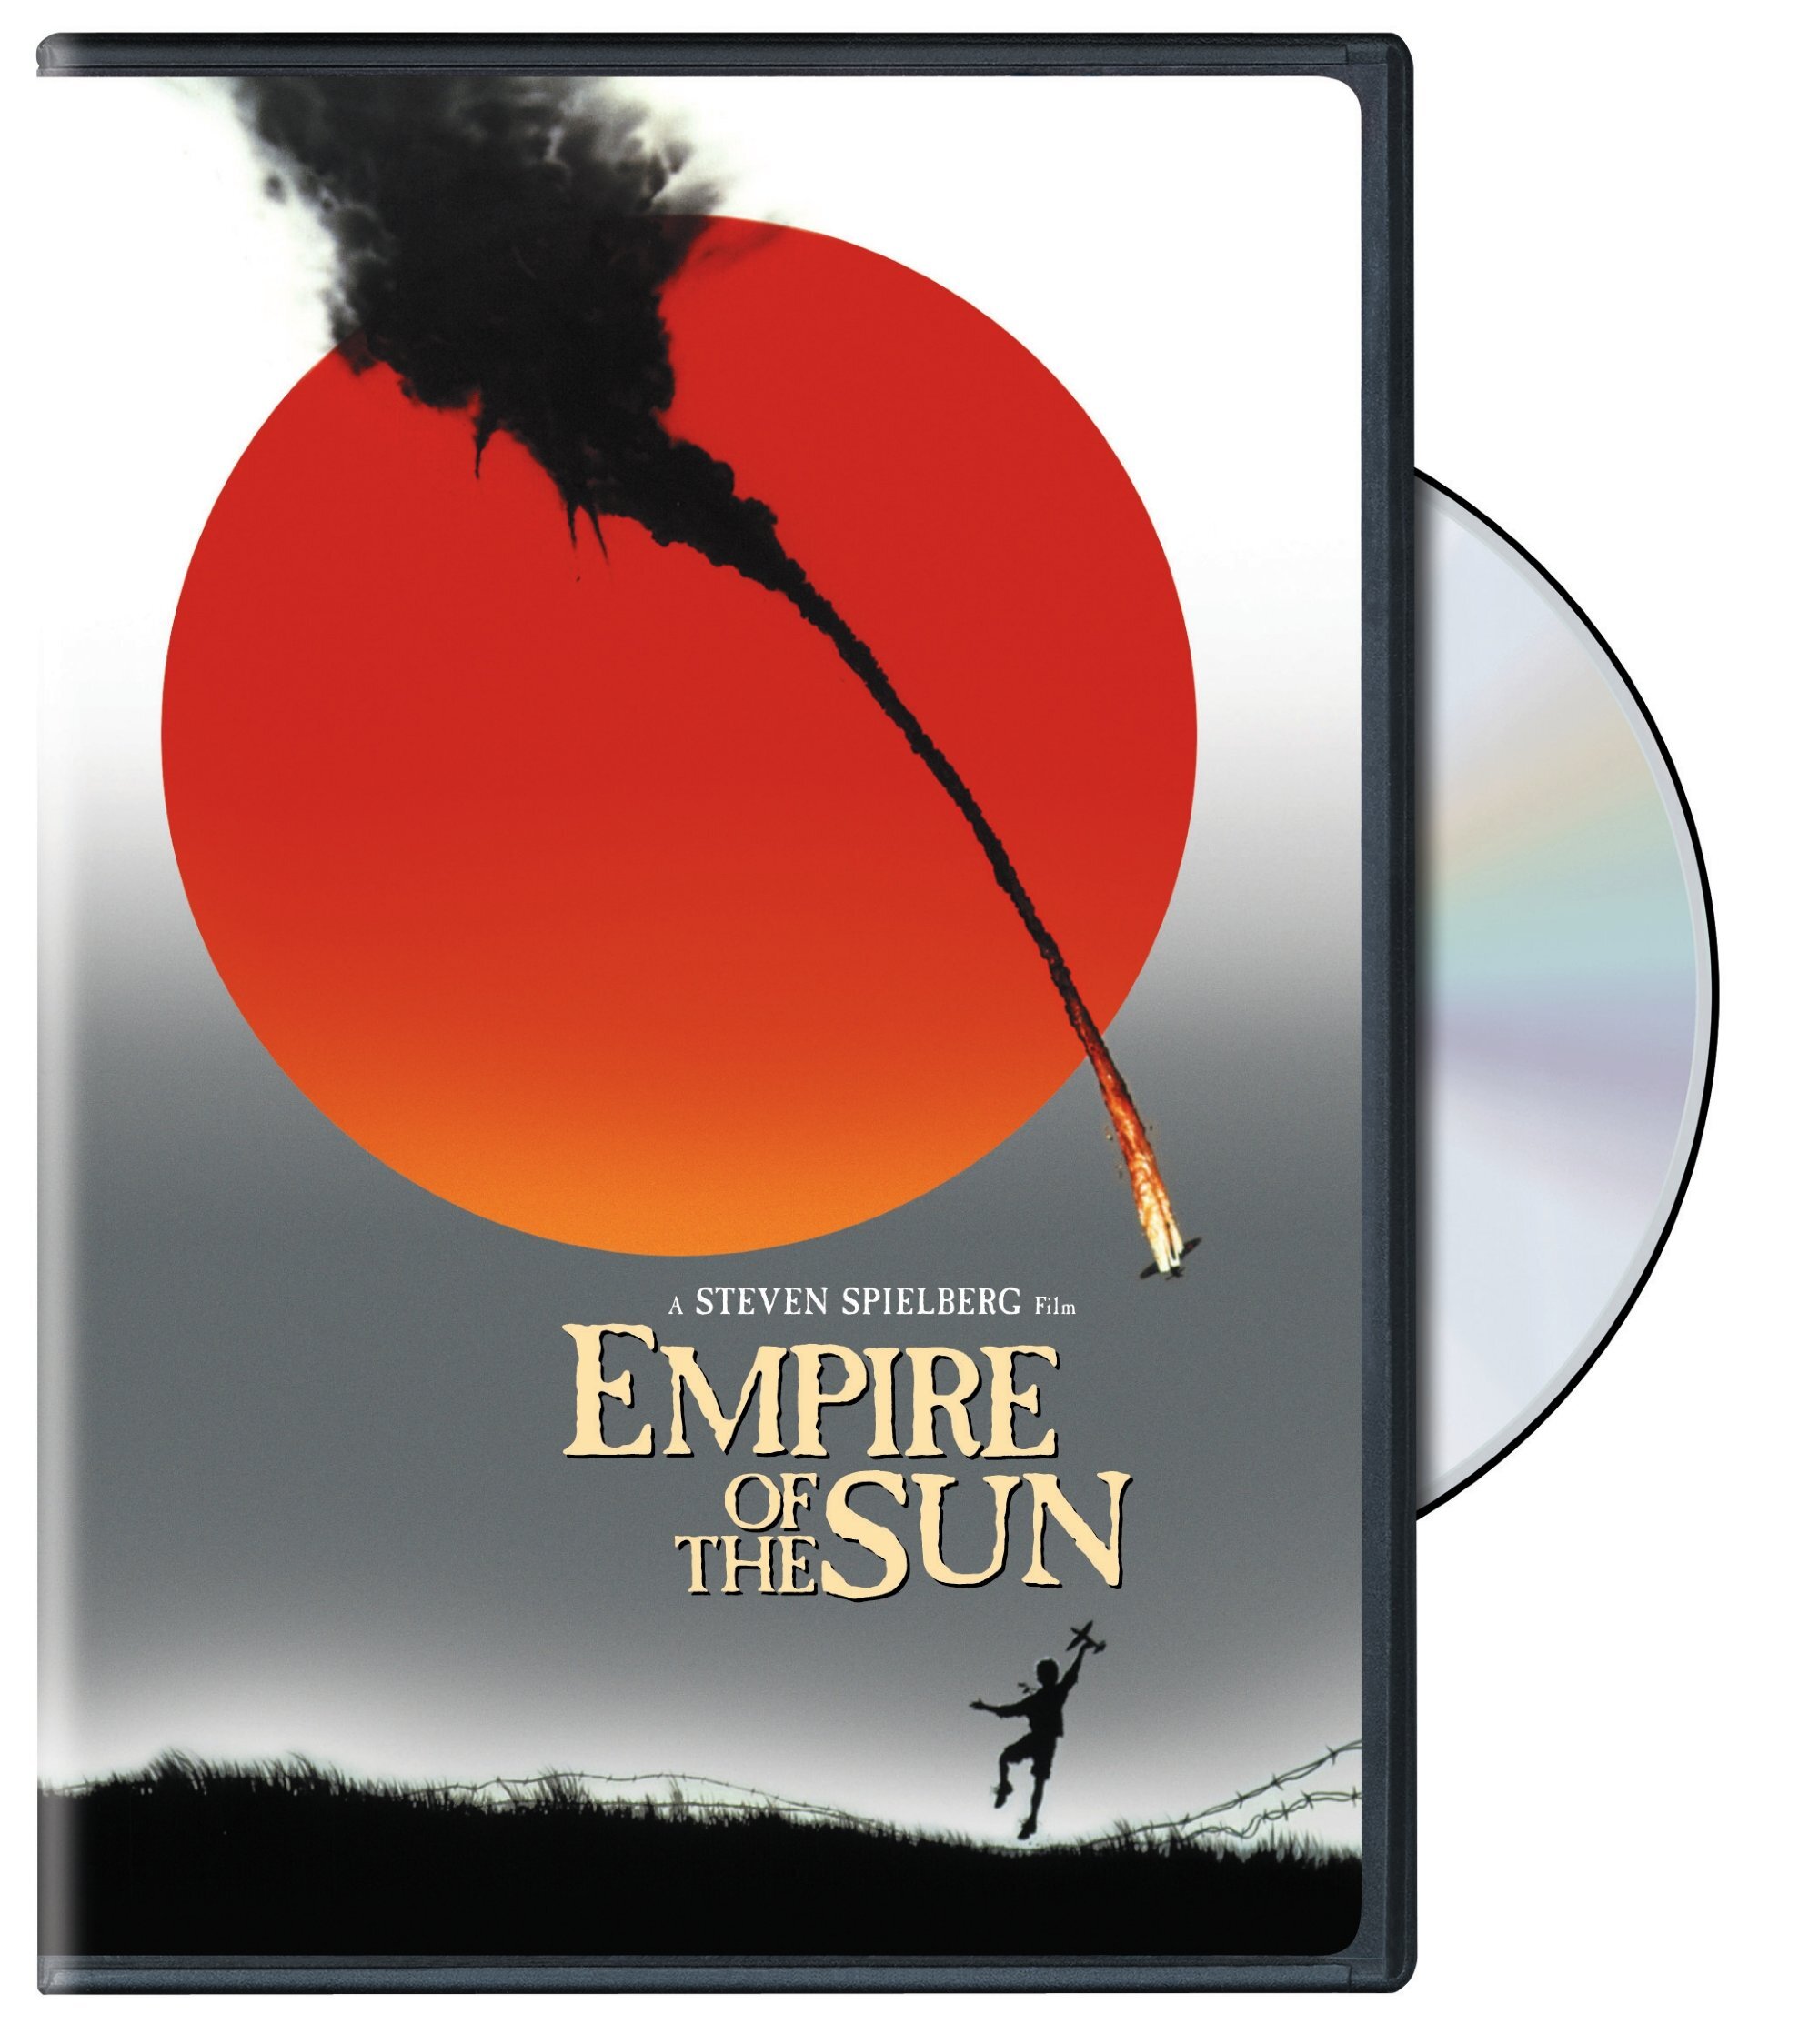 Empire Of The Sun (DVD New Packaging) - DVD [ 1987 ]  - Drama Movies On DVD - Movies On GRUV